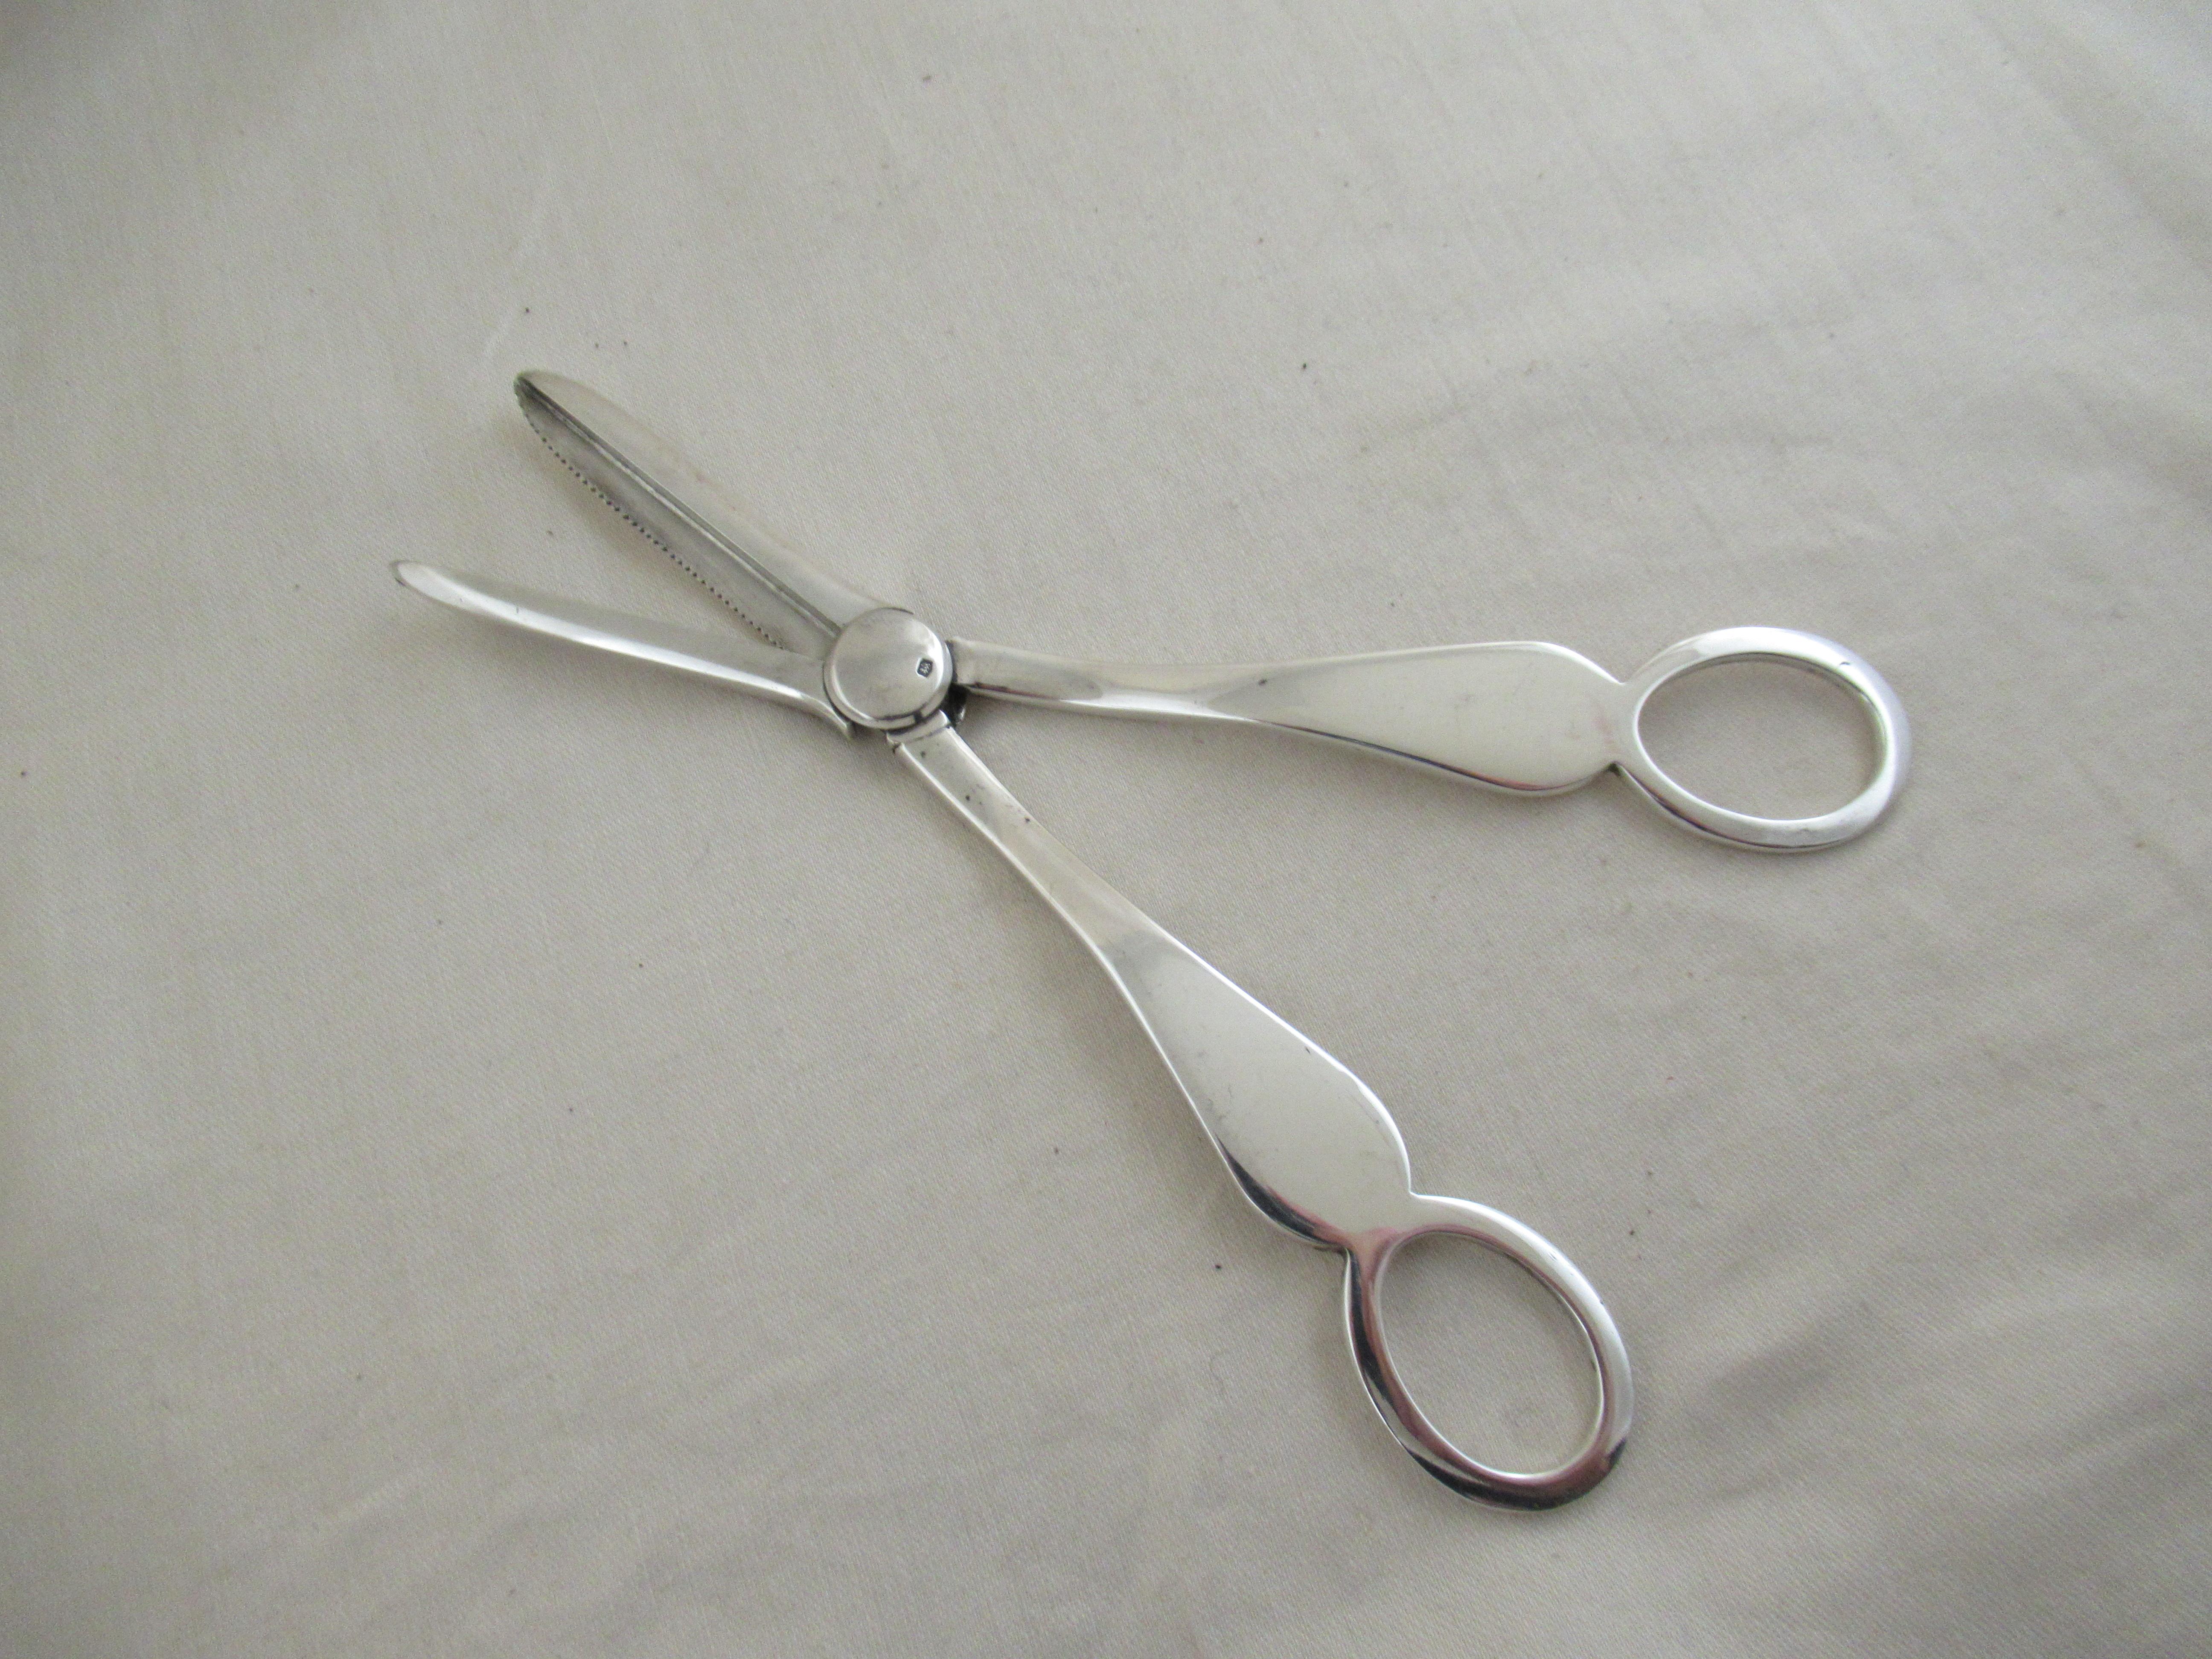 A superb pair of Grape Scissors or shears, made in the most sought after Old English pattern.
Used to cut a bunch of grapes from the vine, but also to grip the cut stem so that the bunch can be lifted down, carefully.. Make sure the top side of the